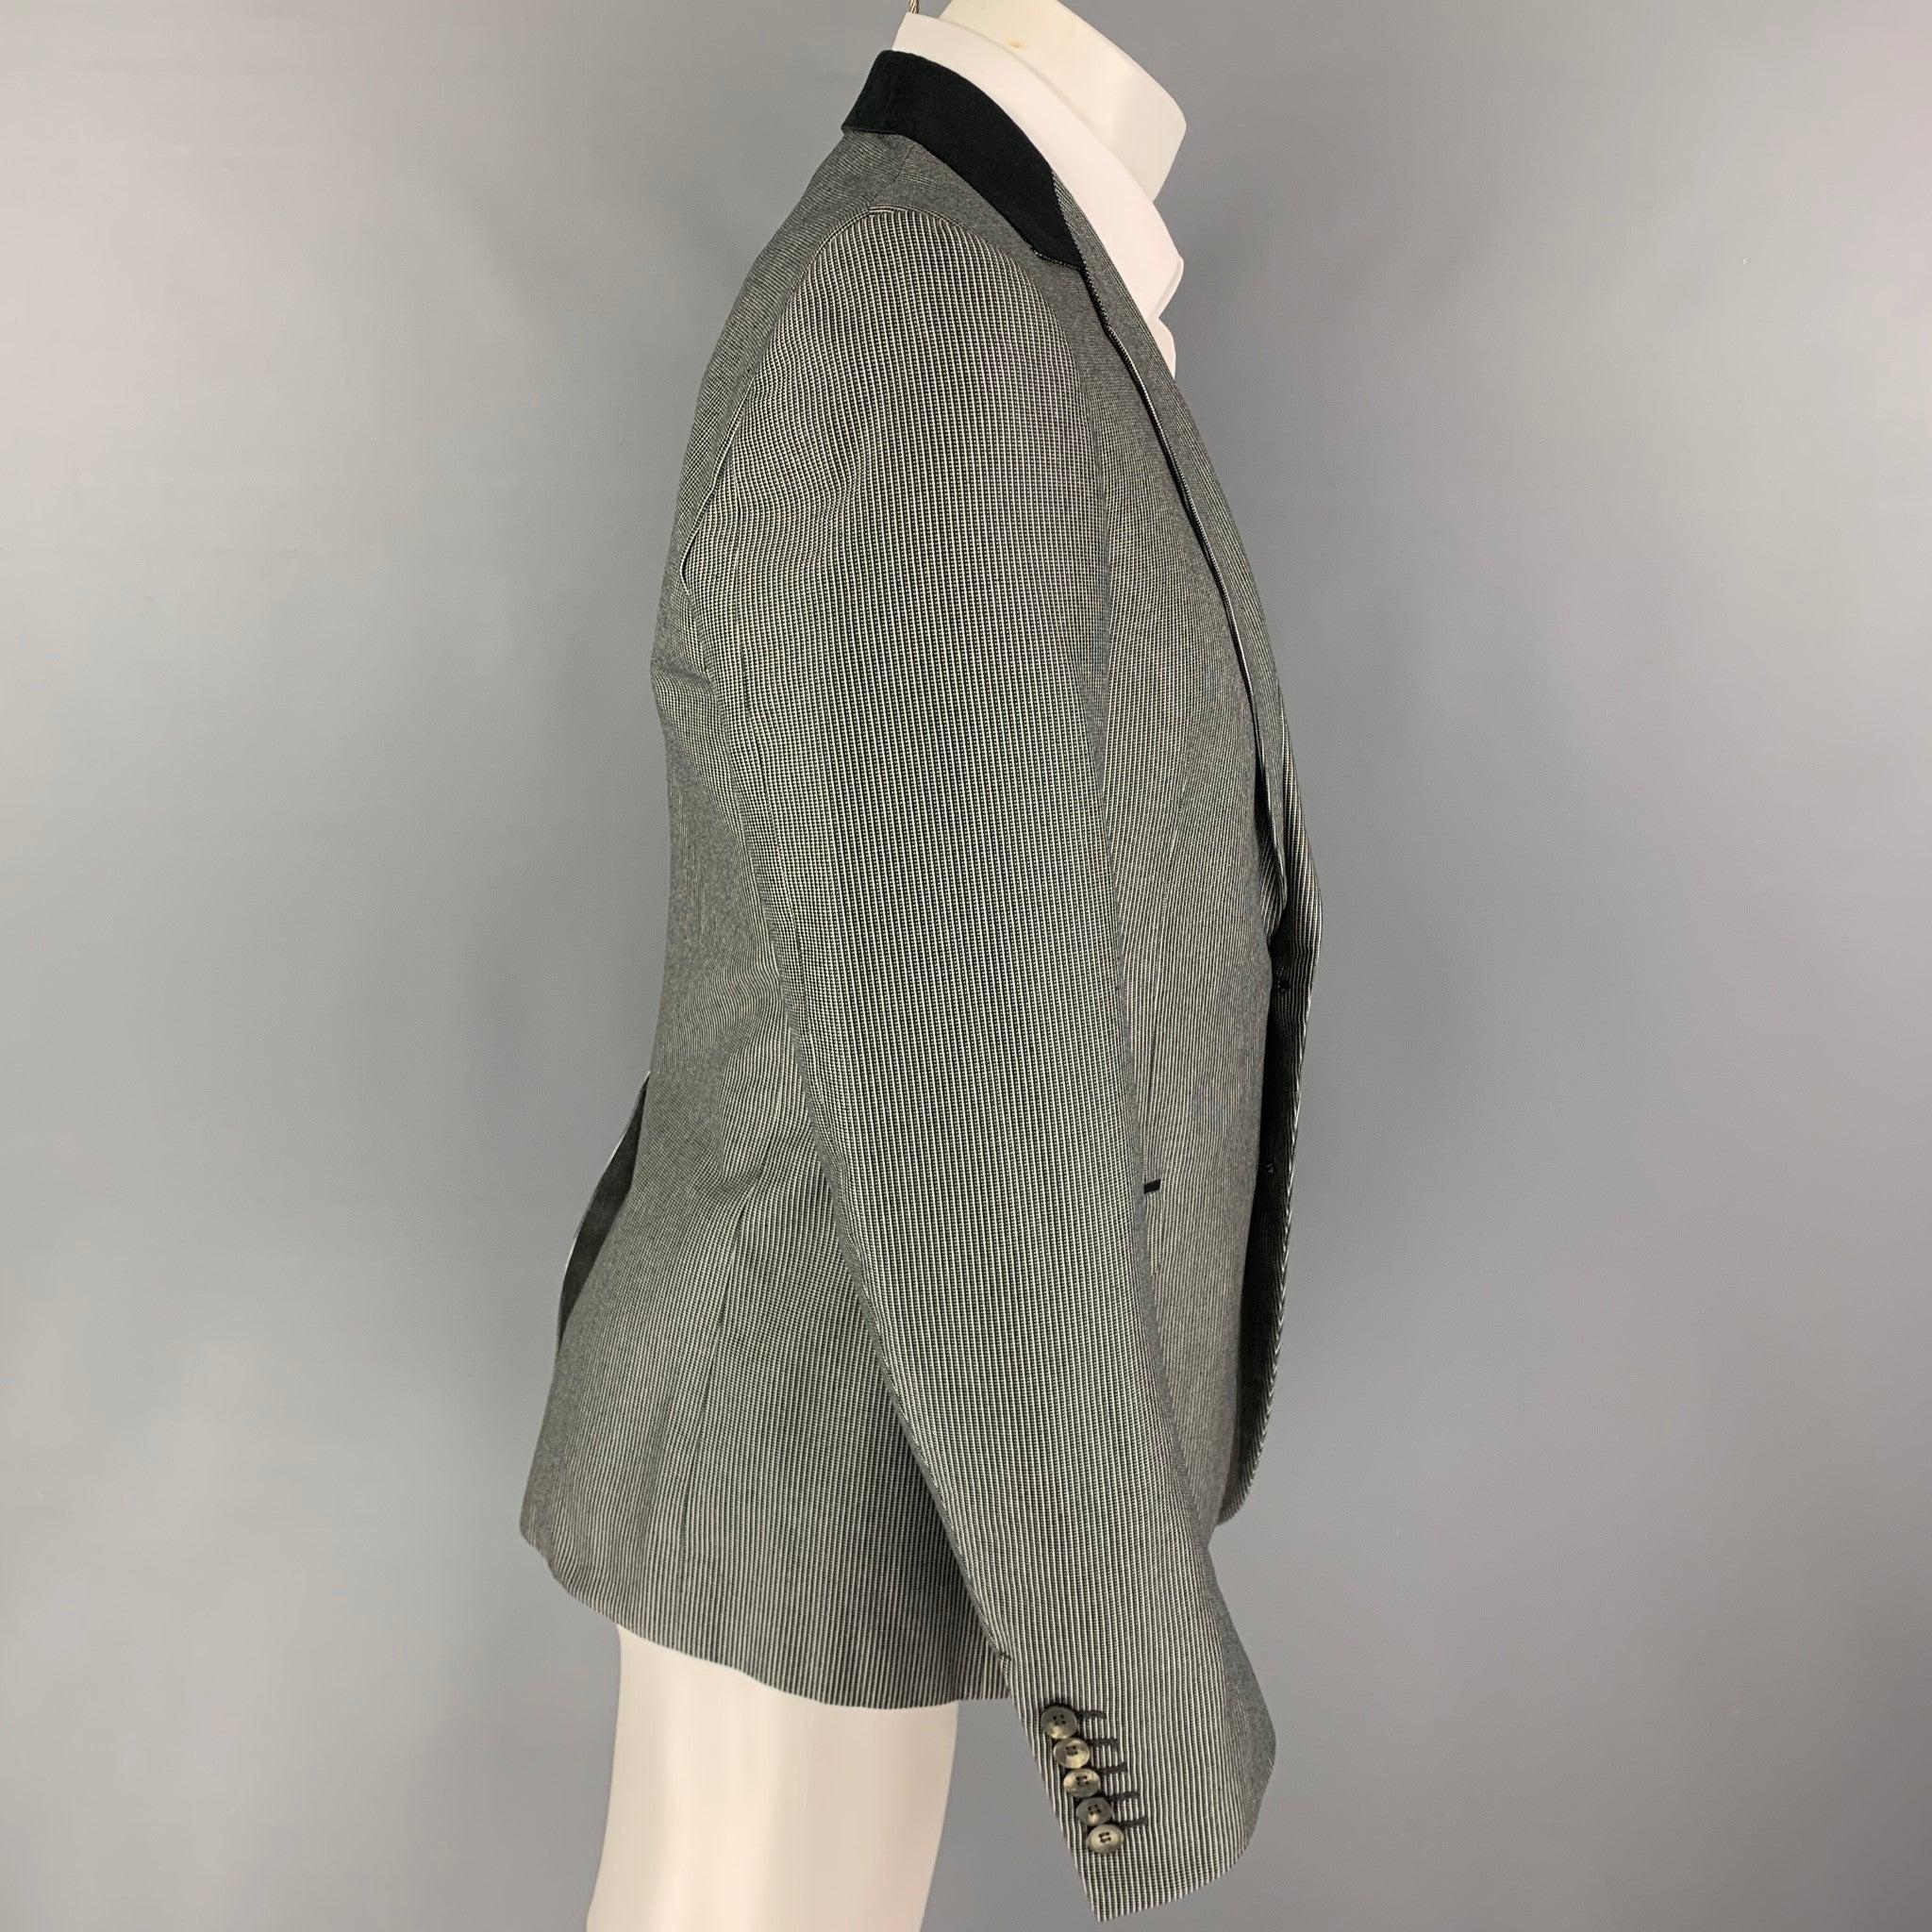 GUCCI sport coat comes in a black & white stripe cotton with a full liner featuring a notch lapel, flap pockets, single back vent, and a double button closure. Made in Italy.
Excellent
Pre-Owned Condition. 

Marked:   50 R  

Measurements: 
